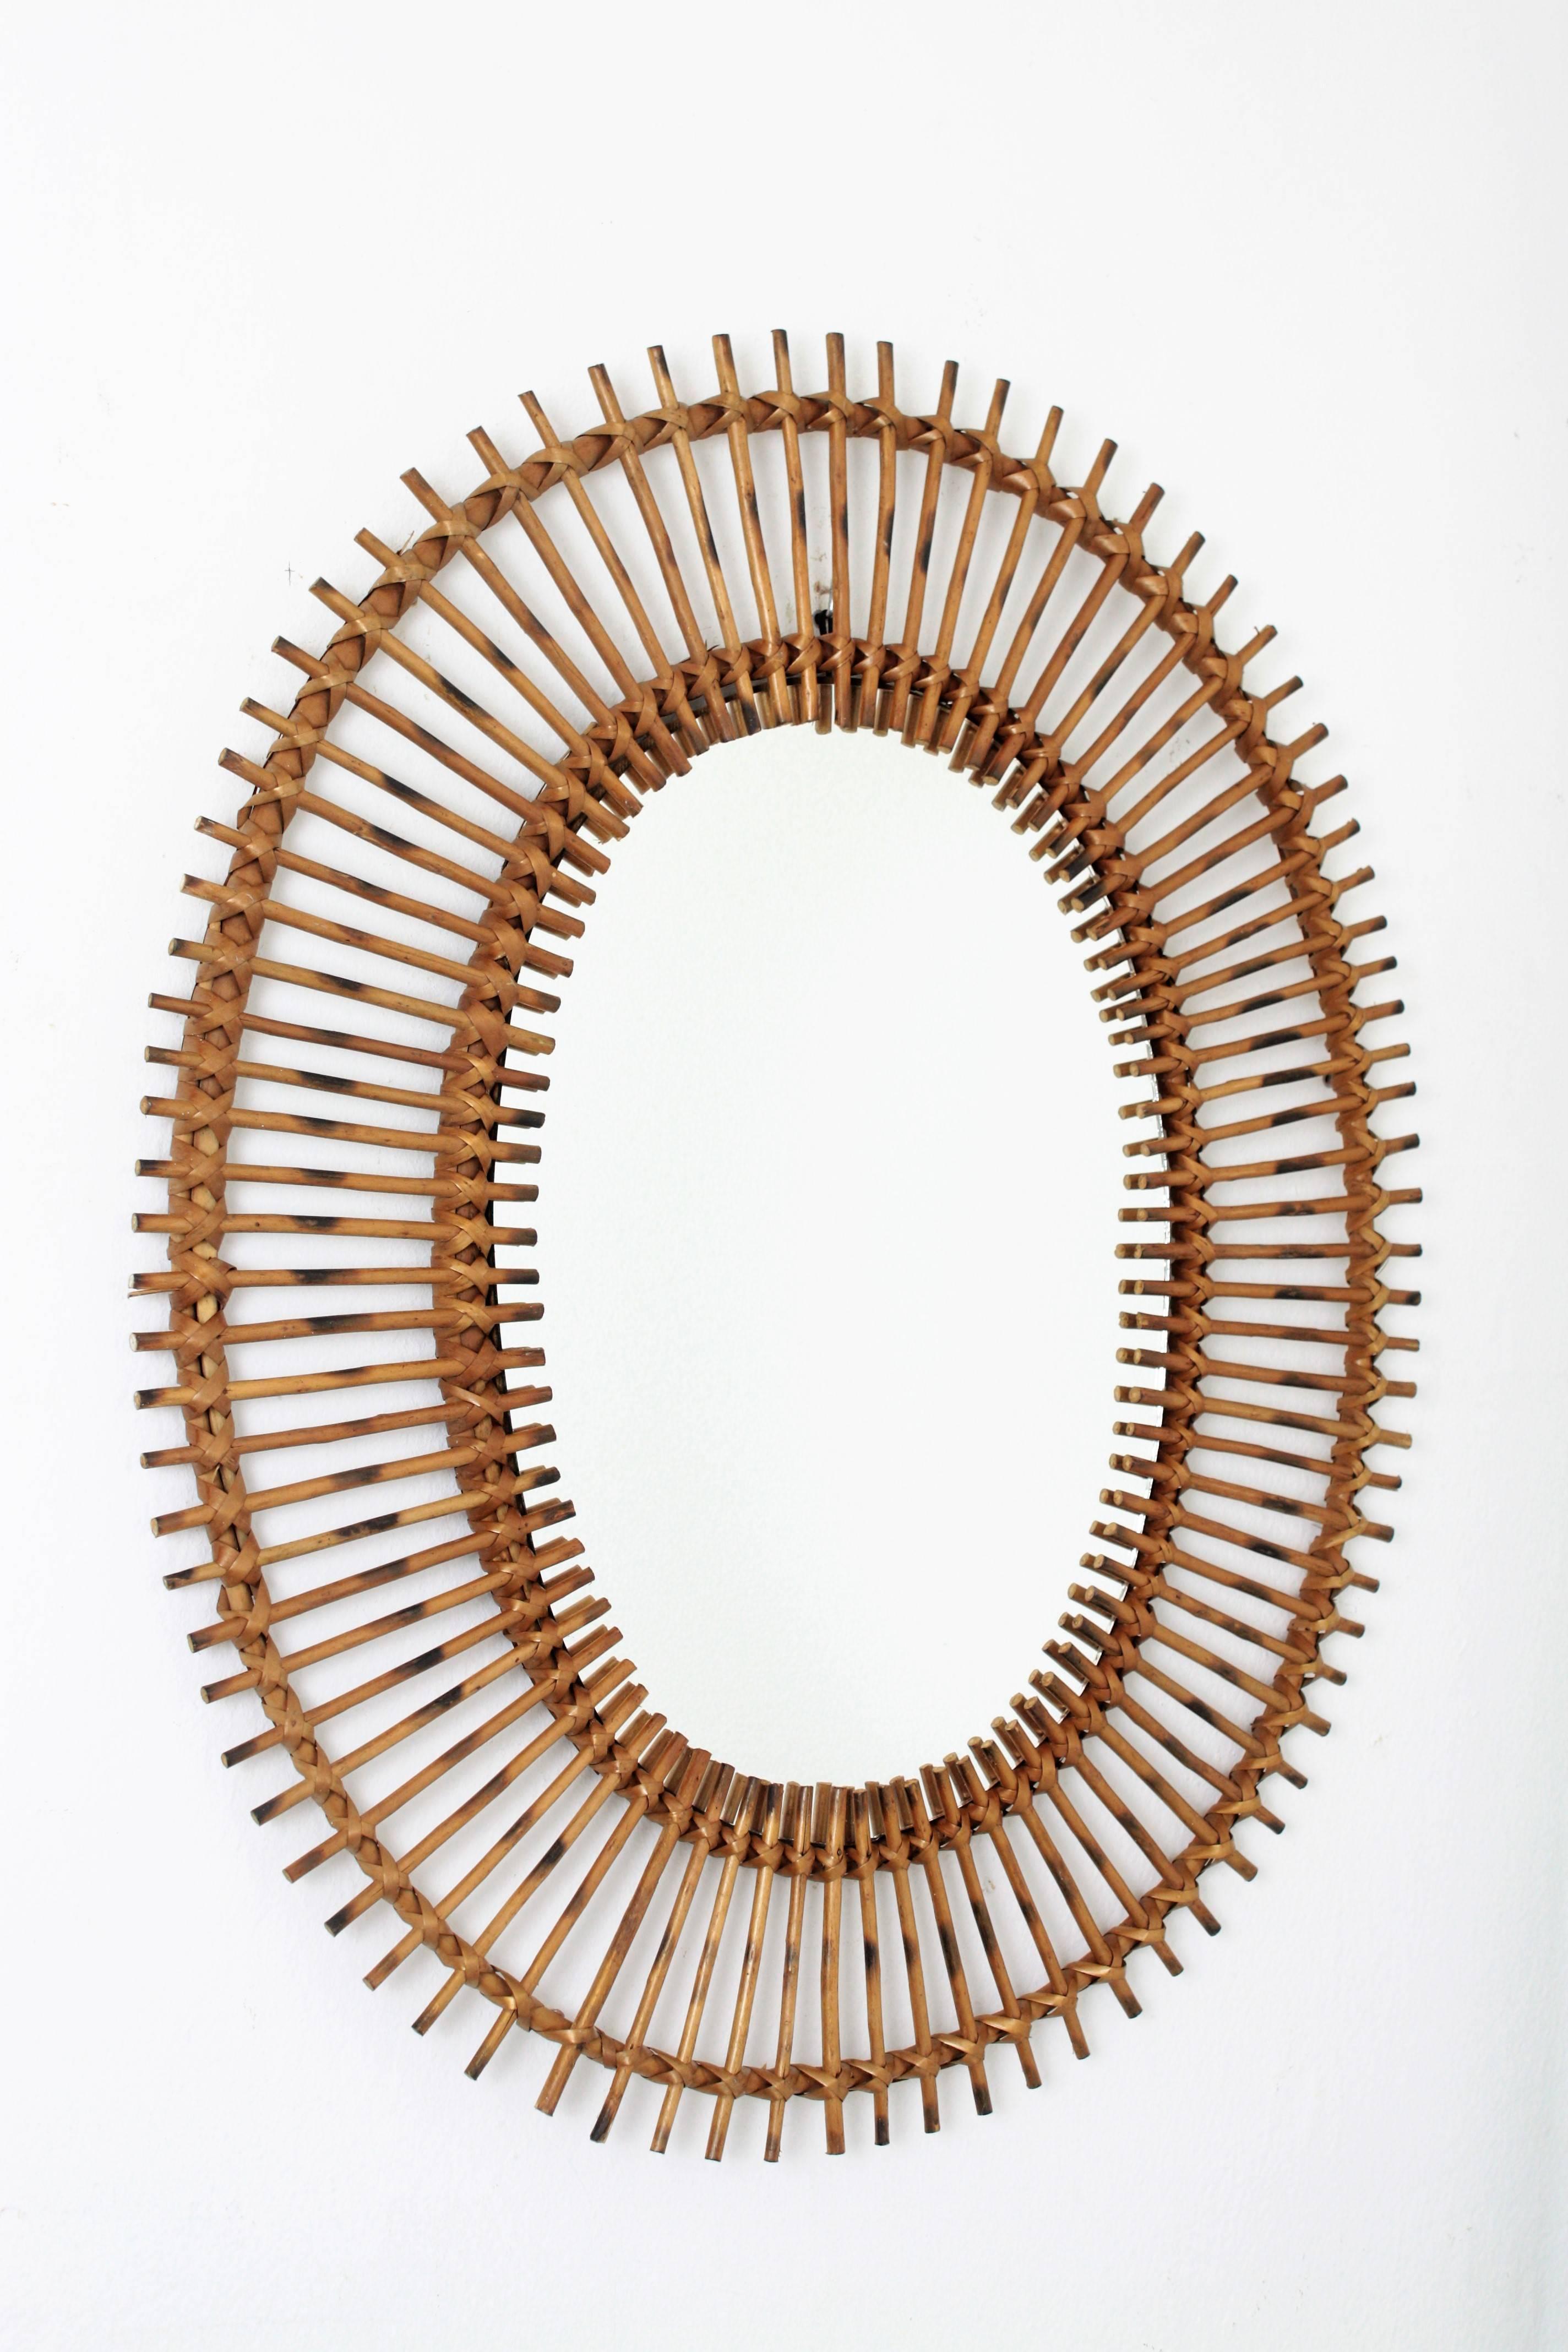 A beautiful handcrafted rattan or wicker sunburst mirror with oval shape, 
Spain, 1950s-1960s.


Avaliable a huge collection of mirrors in this manner. Please, kindly check our storefront. Join us as 1stdibs favourite dealer to receive our weekly